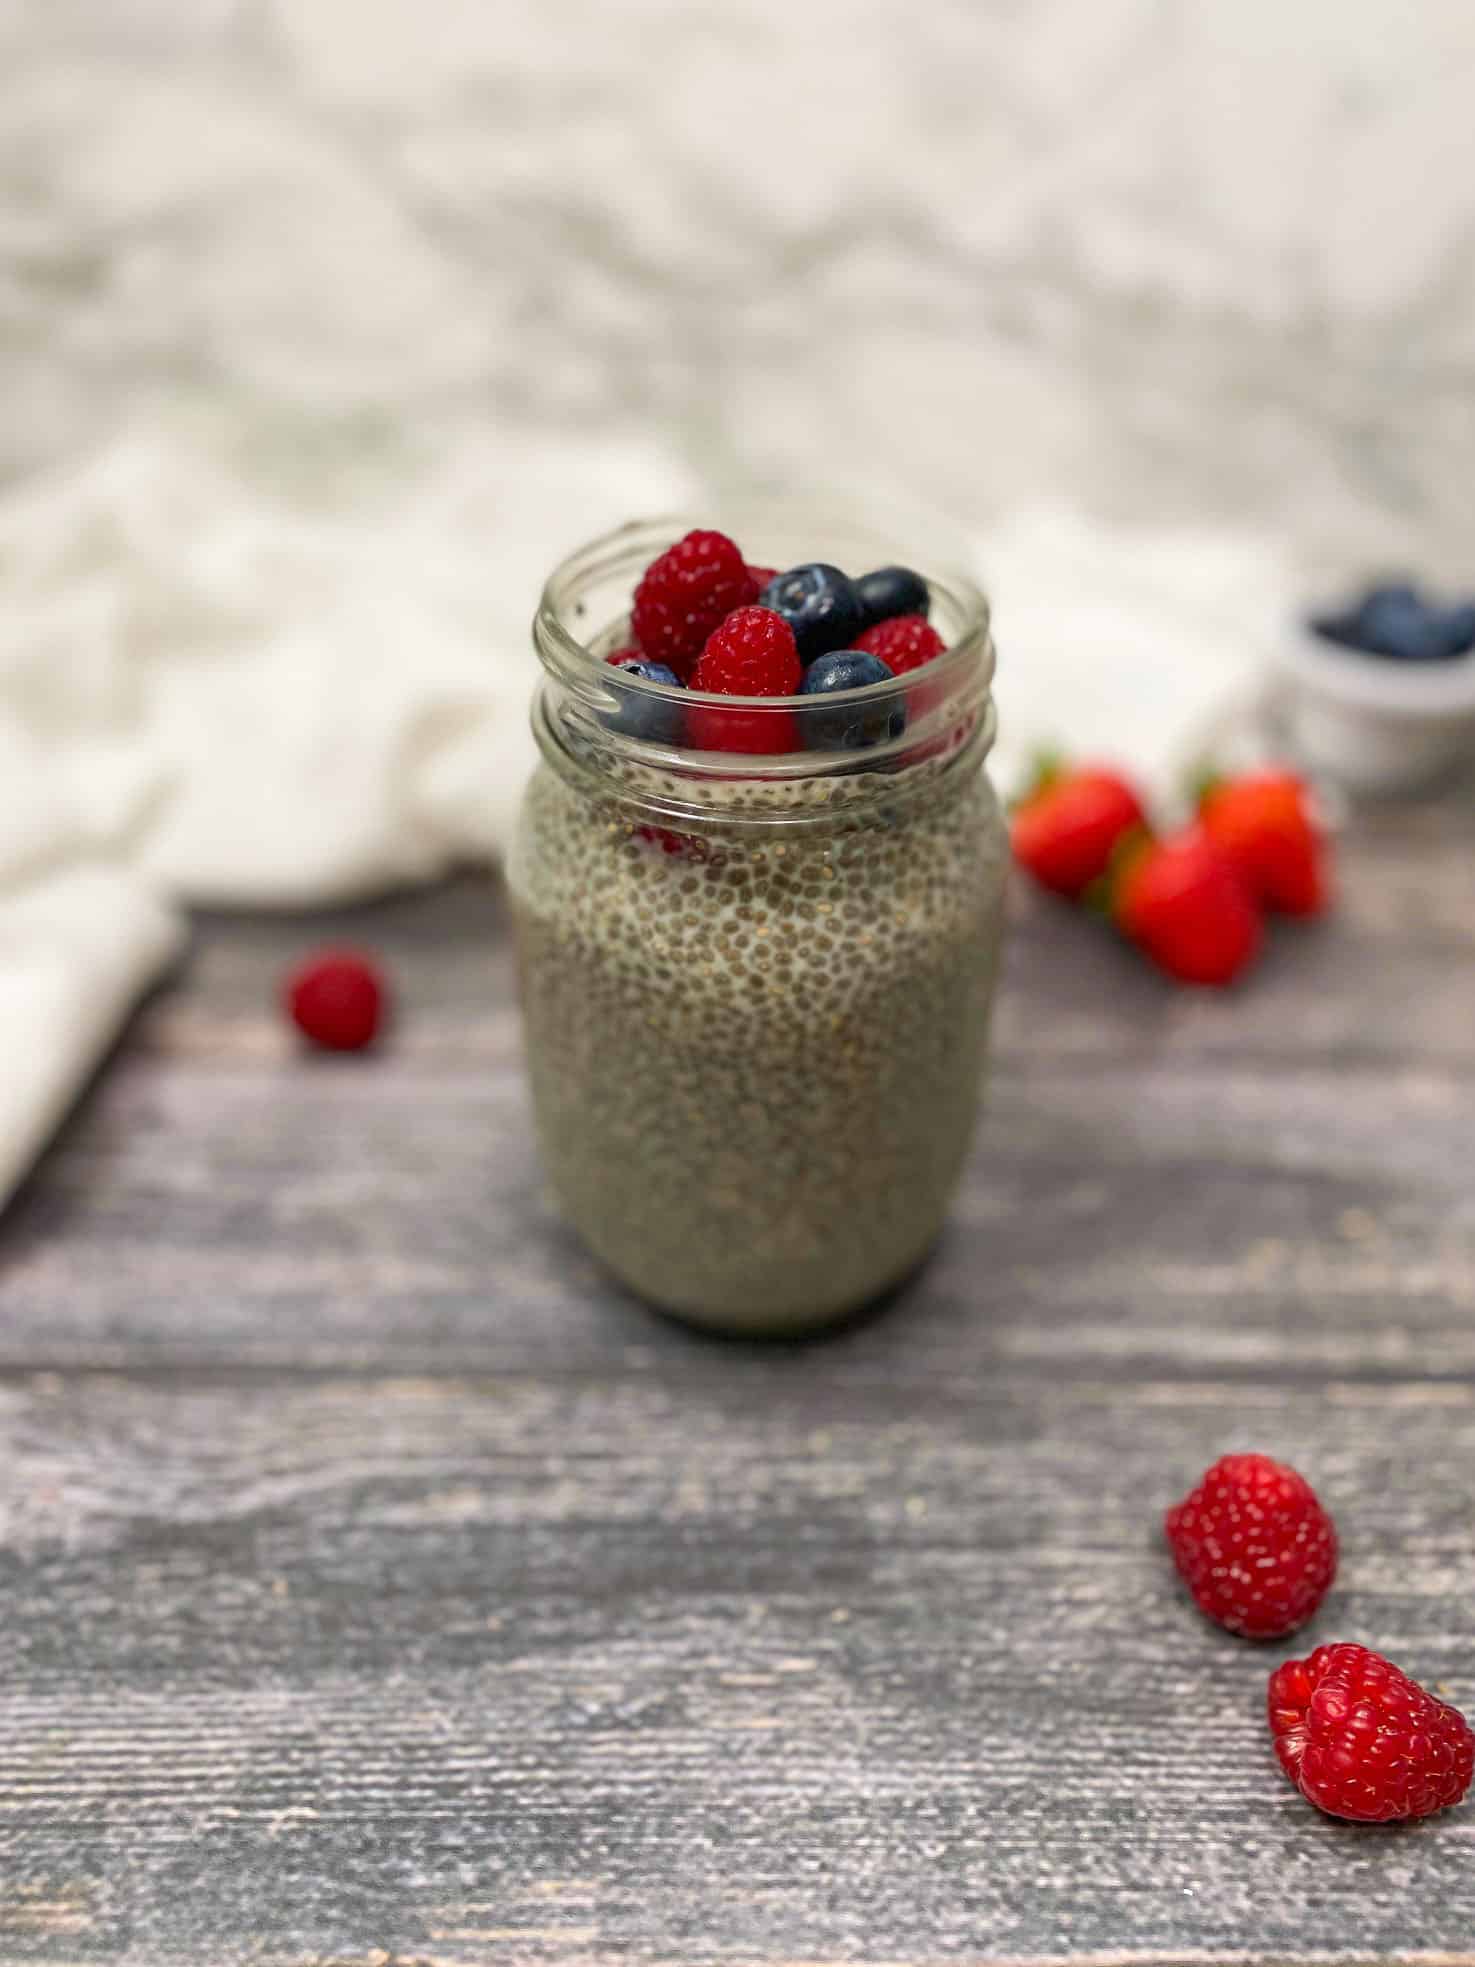 Overnight Chia Pudding - 10 Flavours! - This Healthy Kitchen